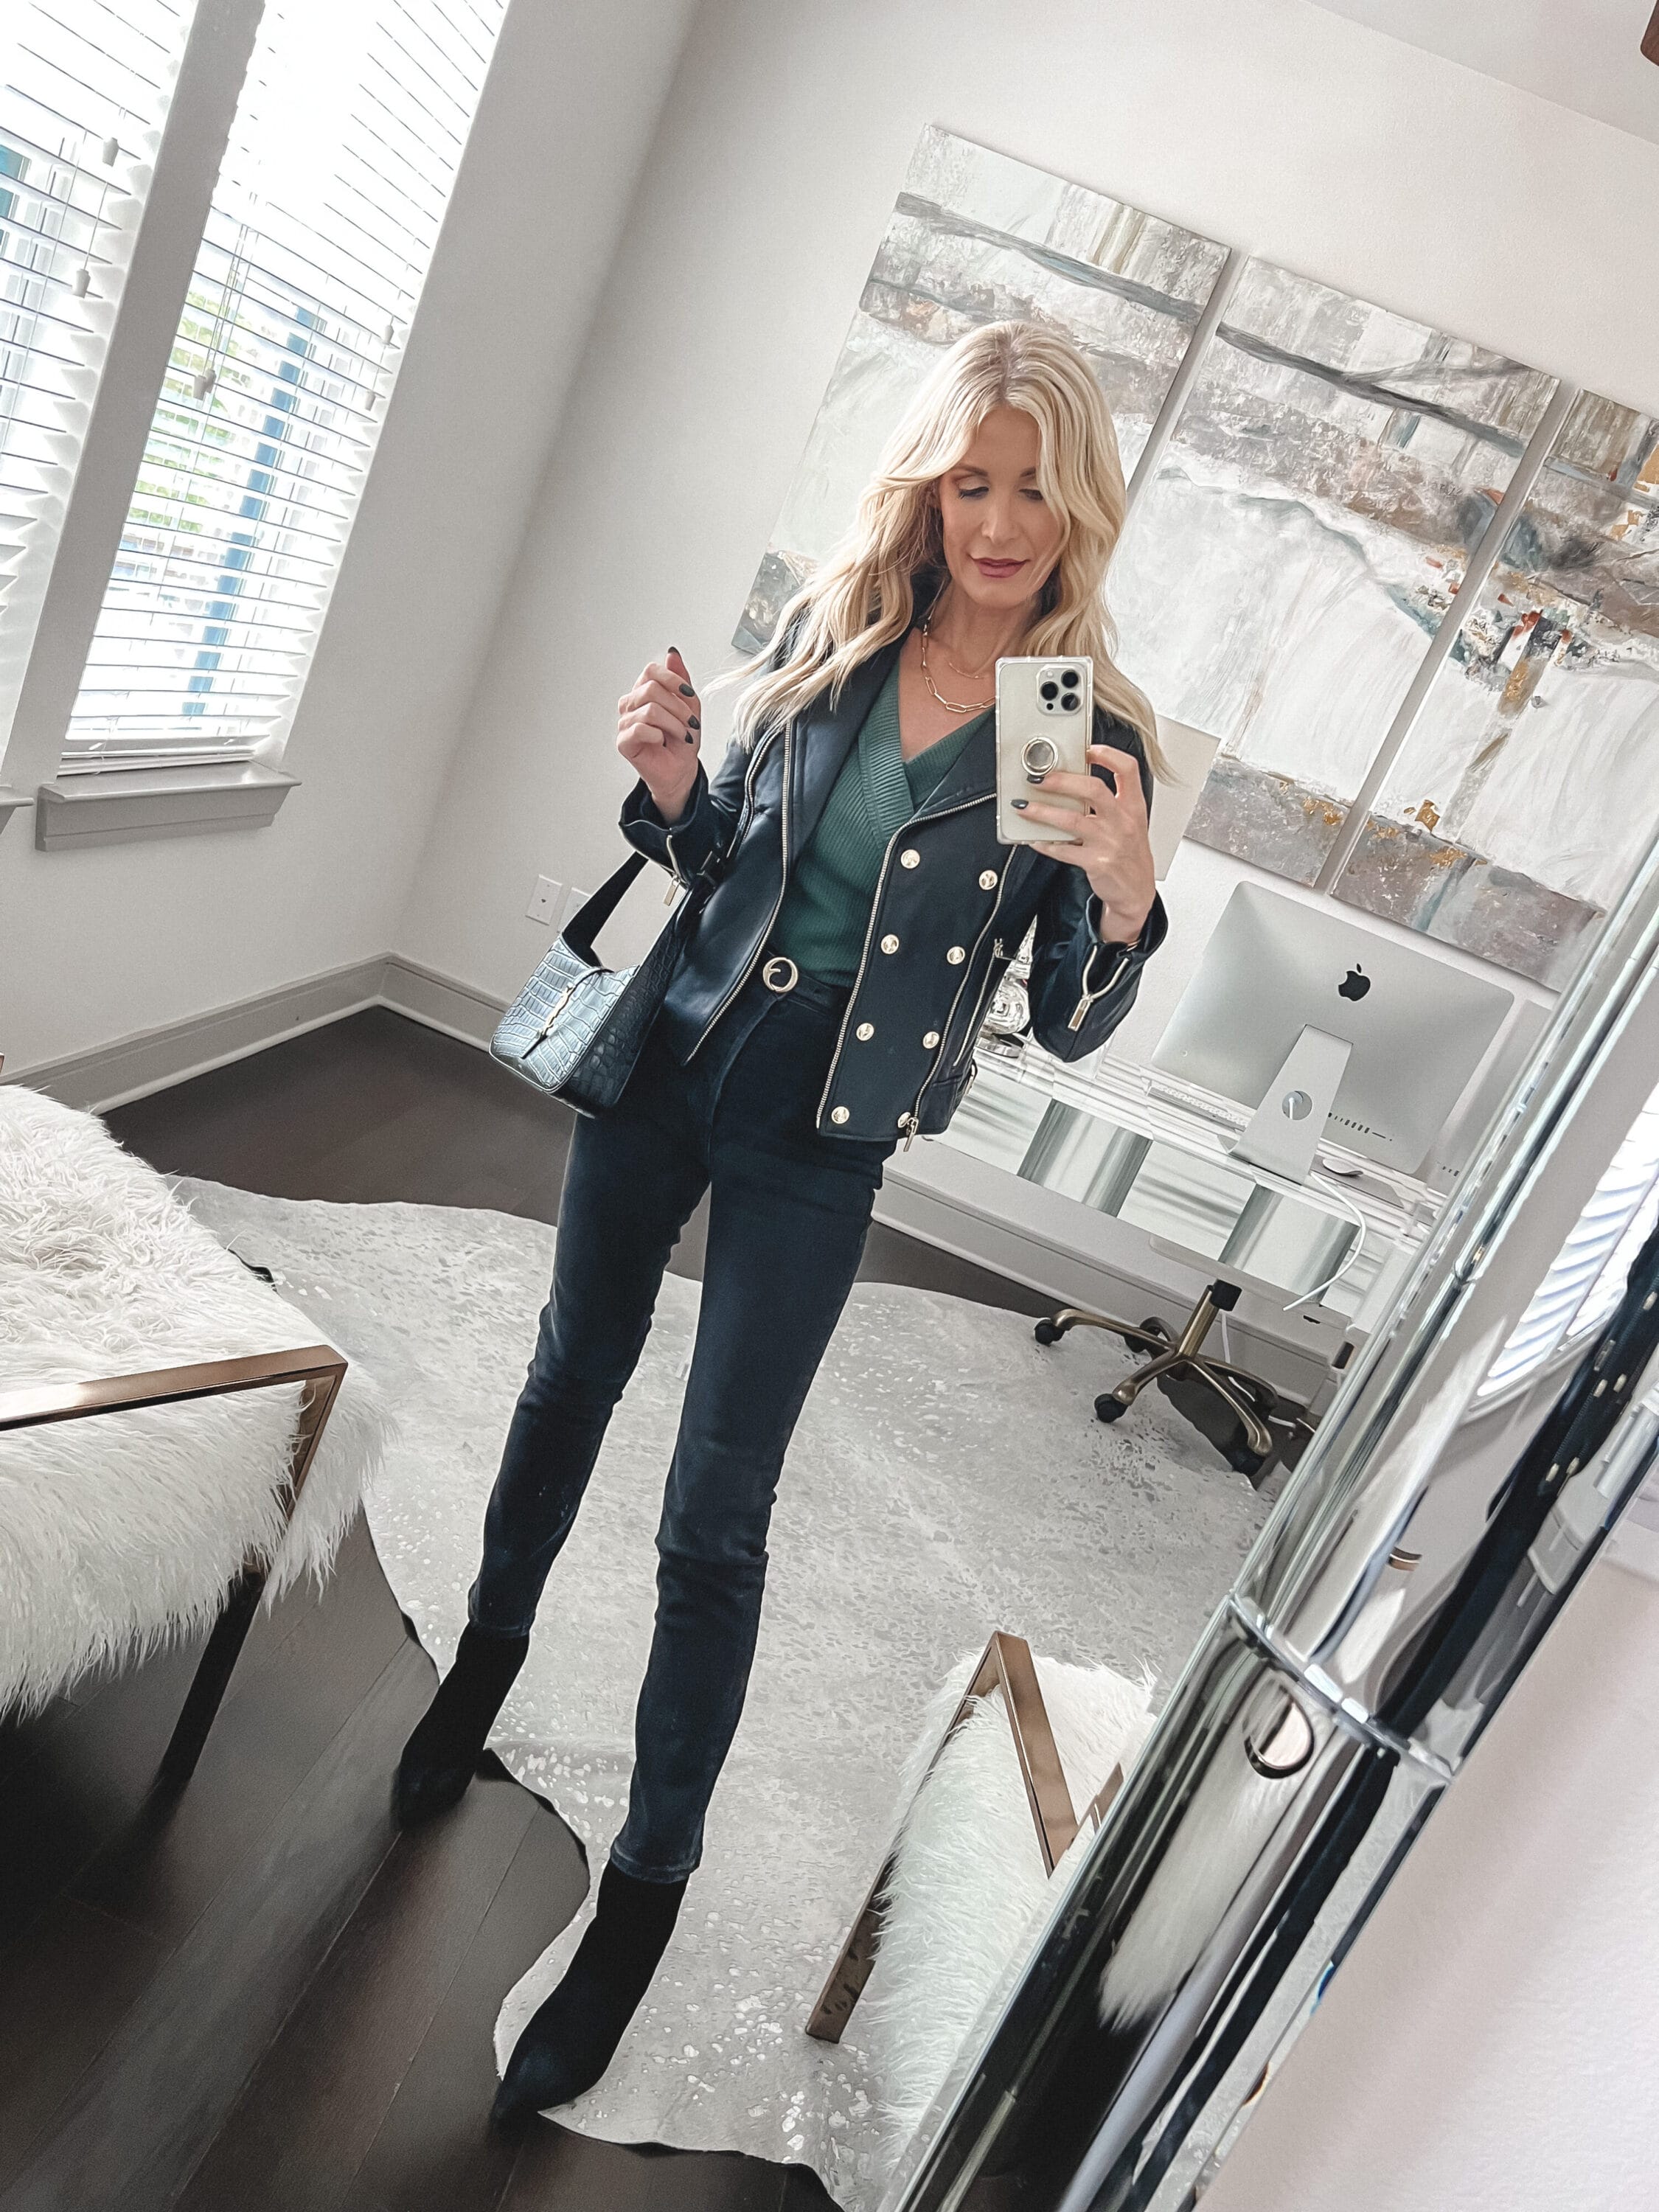 Fashion influencer over 40 wearing military leather jacket with gold hardware as one of the best winter jackets your wardrobe needs.